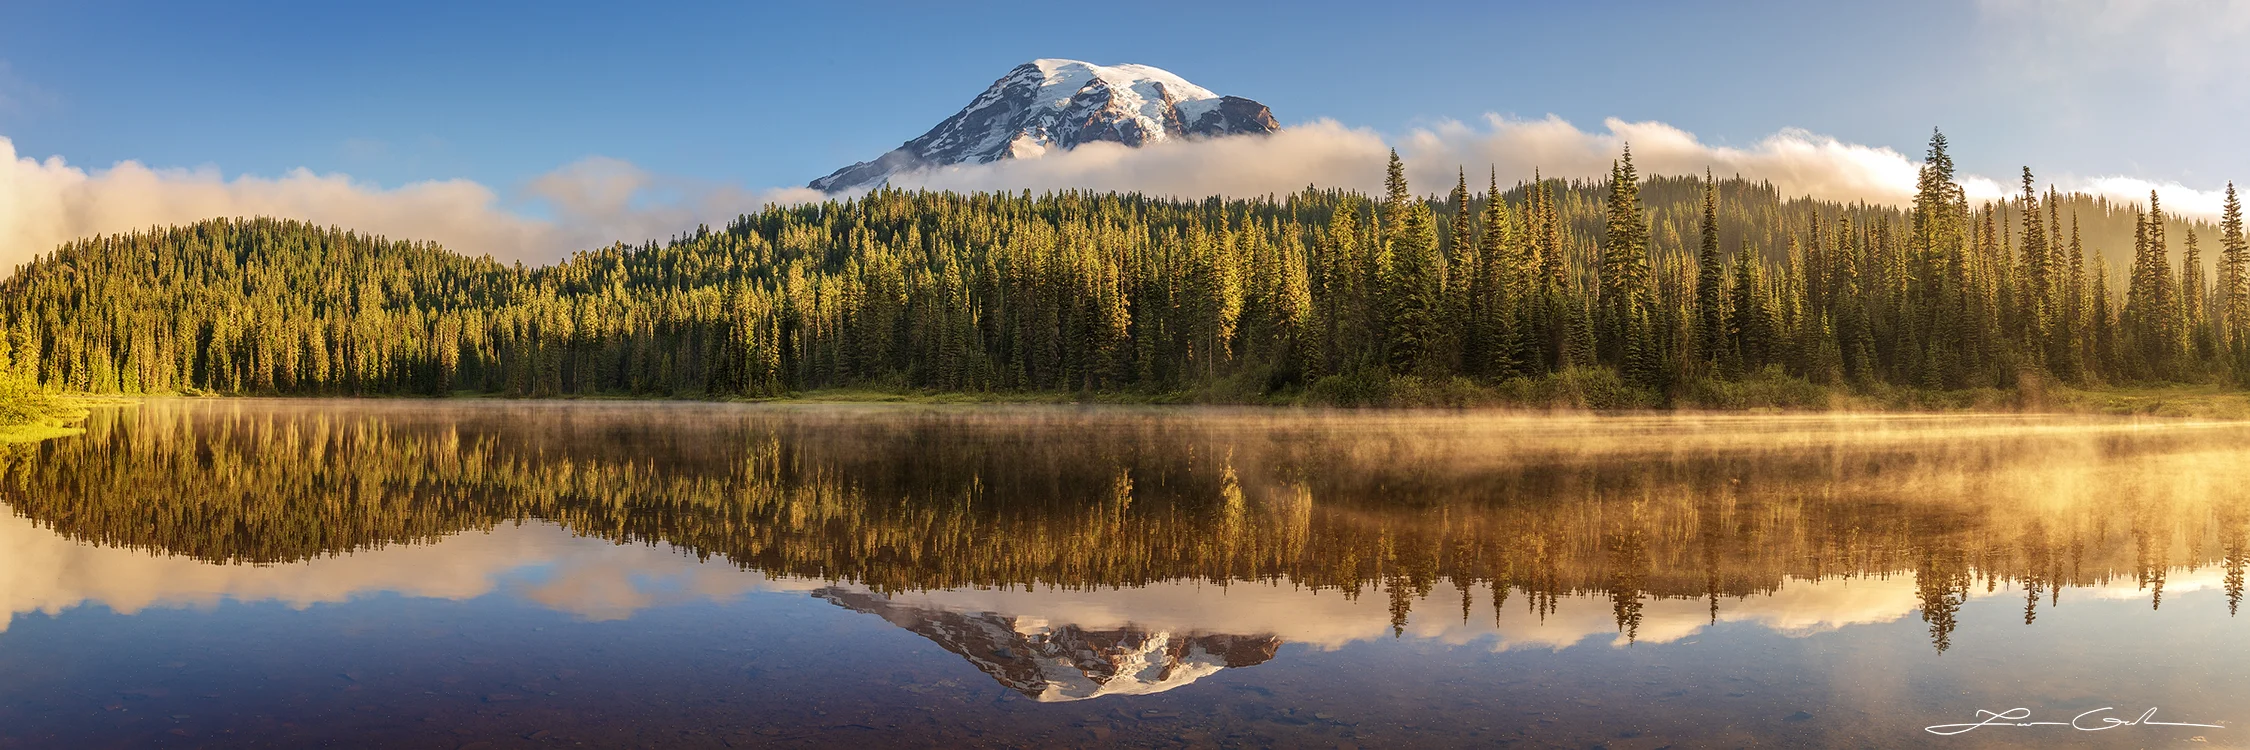 A tranquil photograph capturing the reflection of Mt Rainier in a calm lake at sunrise, with some lingering fog, a clear blue sky, and evergreen trees on the shore. - Gintchin Fine Art